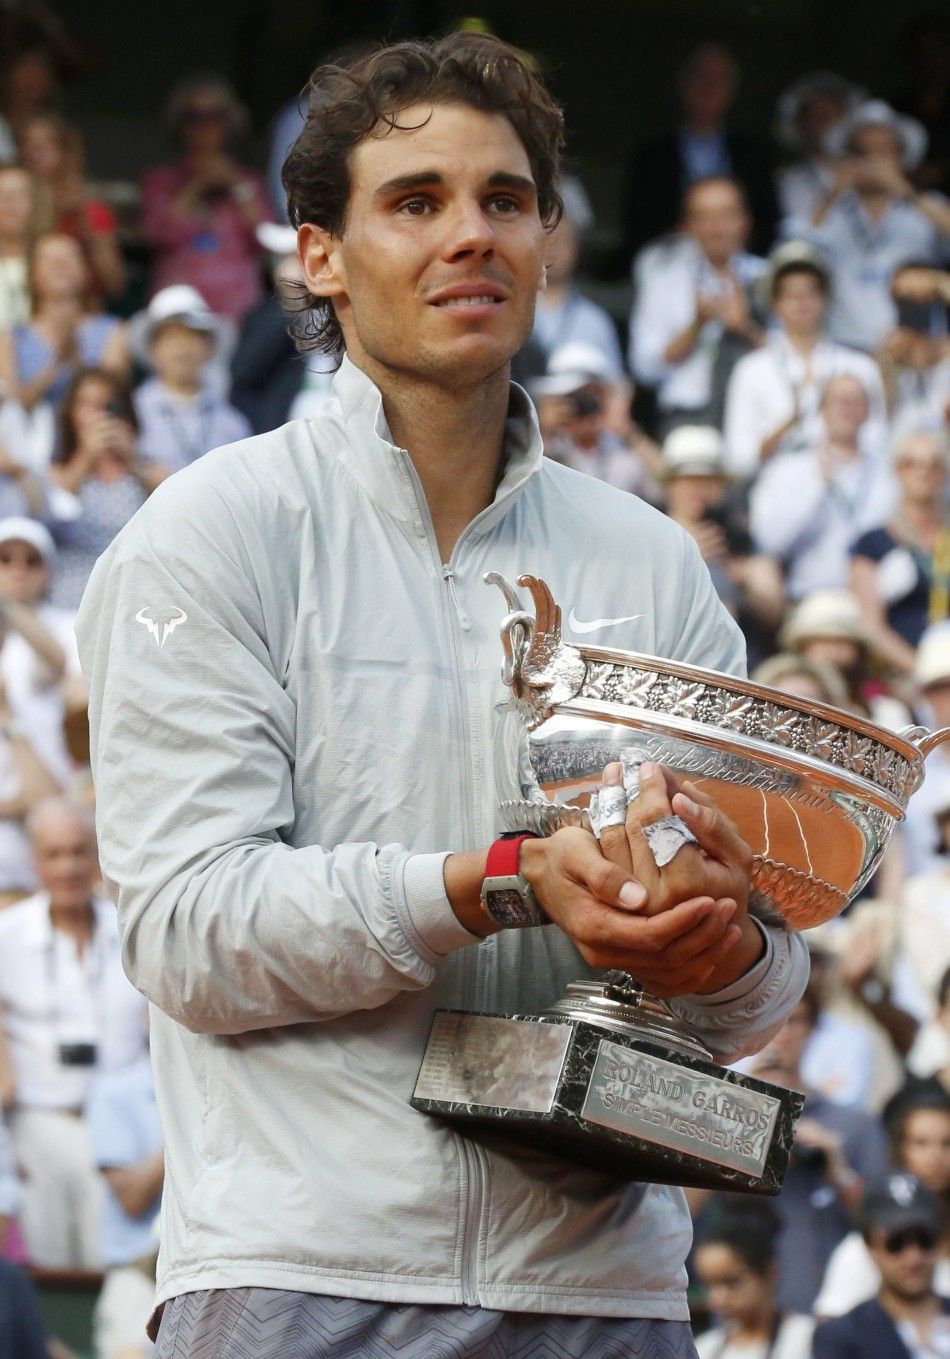 Rafael Nadal of Spain holds the trophy during the ceremony after defeating Novak Djokovic of Serbia during their mens singles final match to win the French Open Tennis tournament at the Roland Garros stadium in Paris June 8, 2014. 